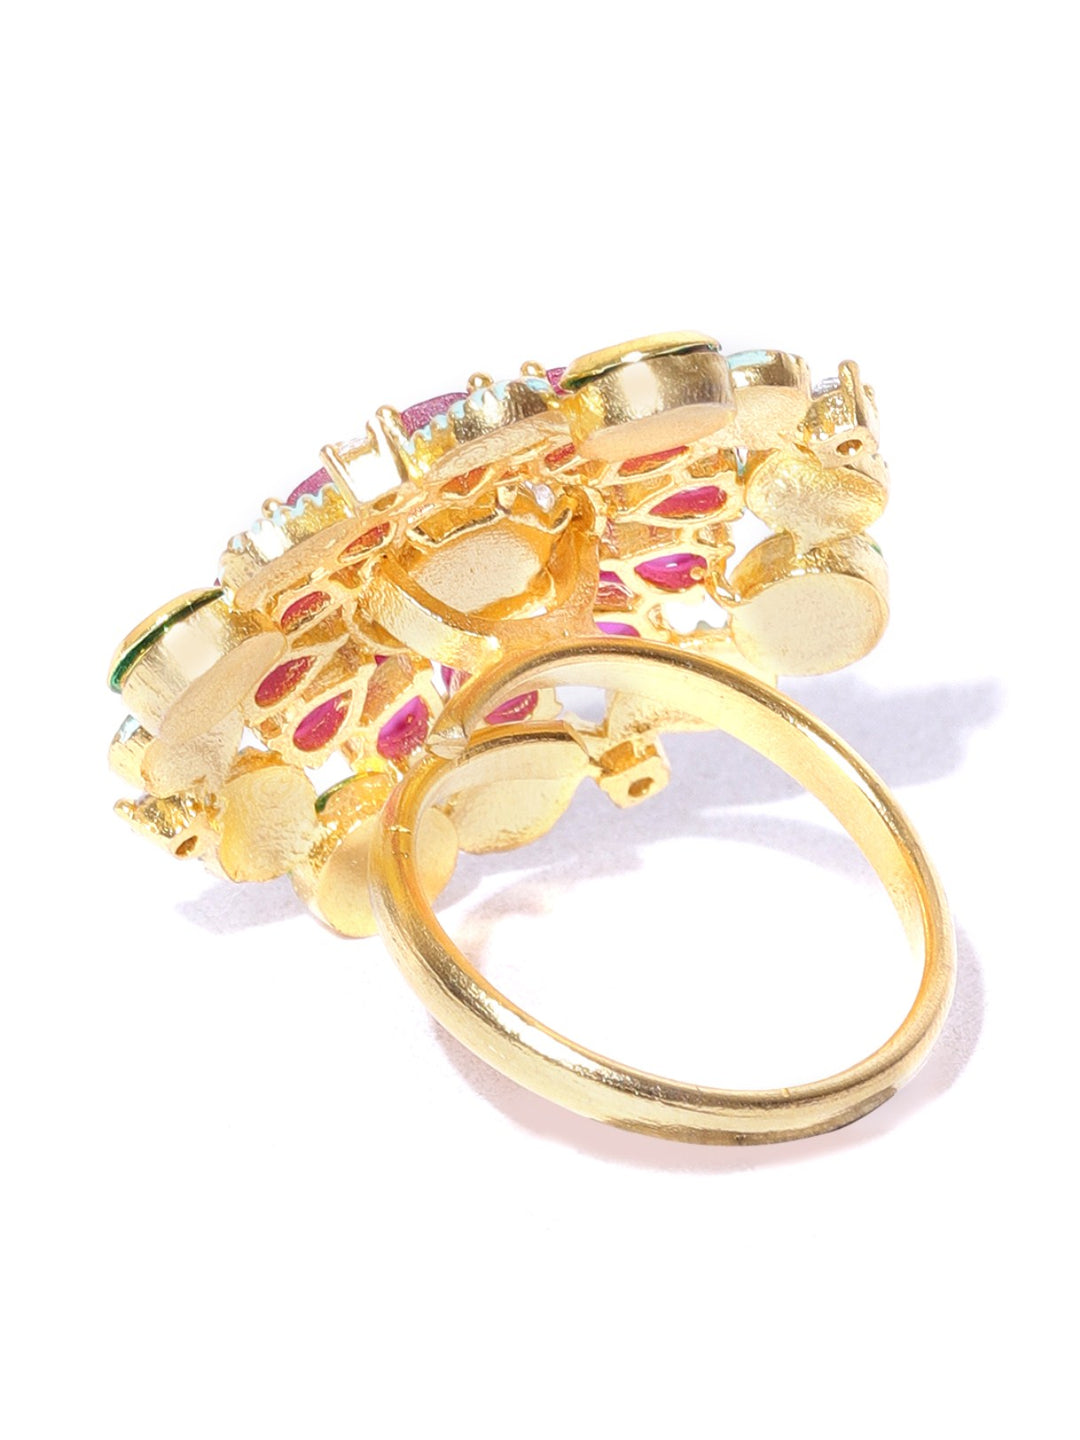 Gold-Plated Floral Patterned Pink and Green Meenakari Adjustable Ring Studded with Kundan and Ruby